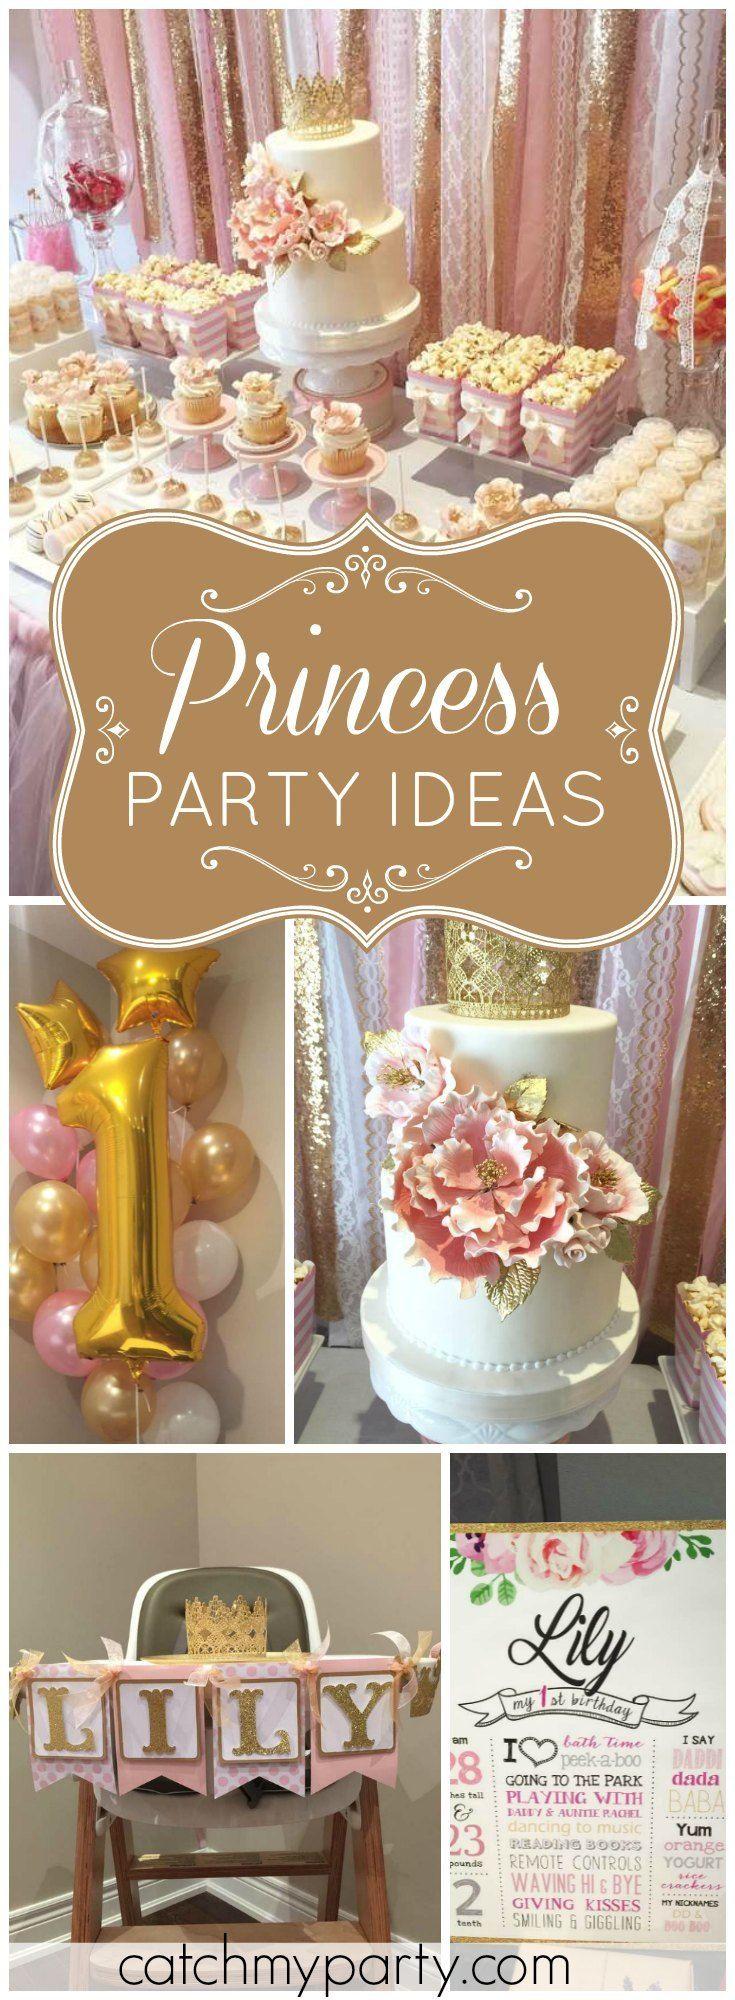 Wedding - Pink And Gold / Birthday "Princess Lily's 1st Pink And Gold Birthday"